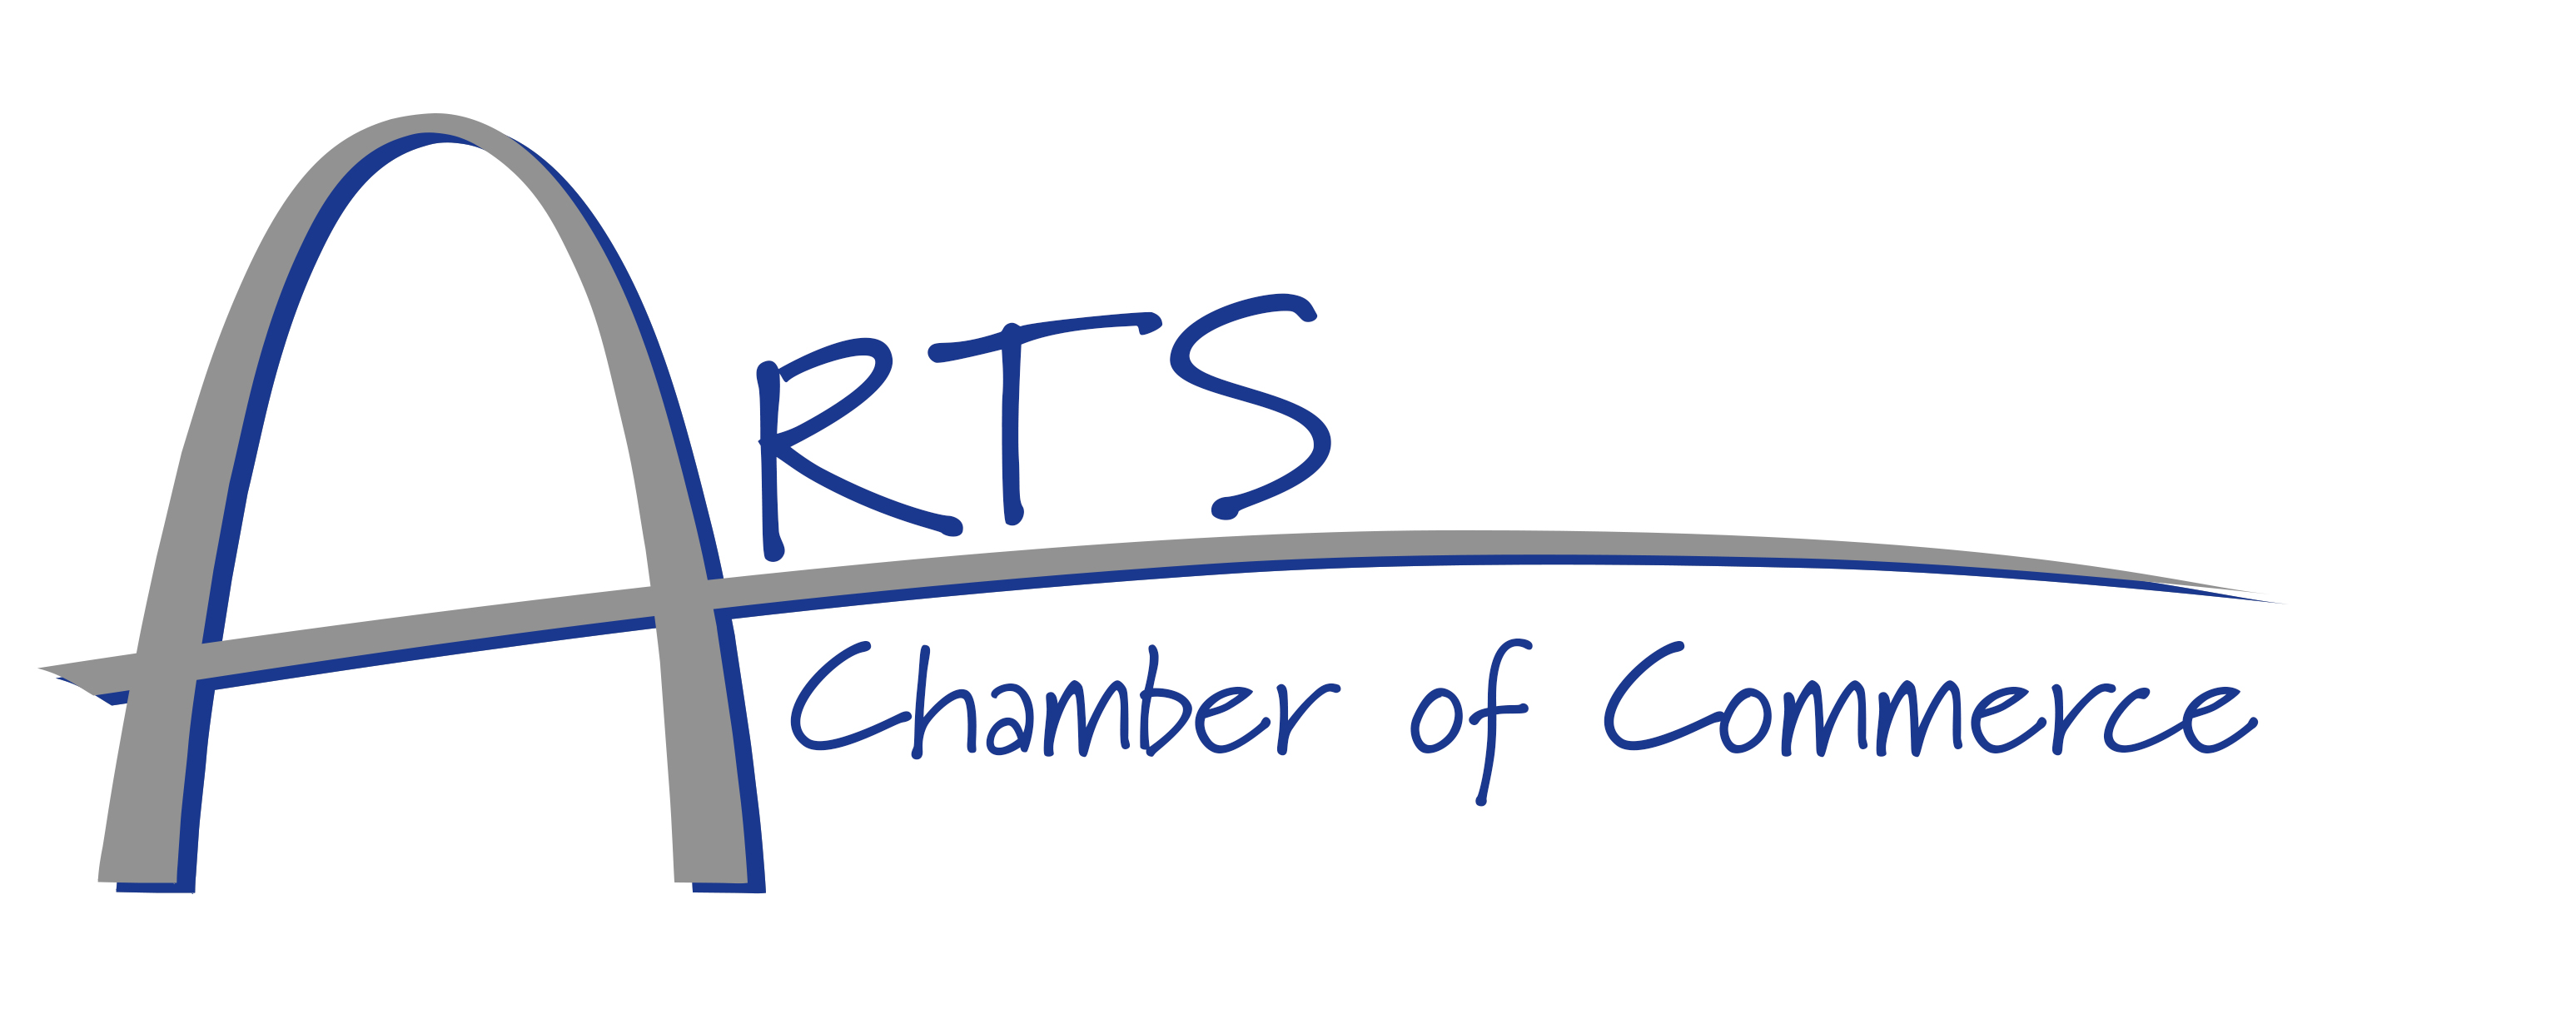 St. Louis Arts Chamber of Commerce